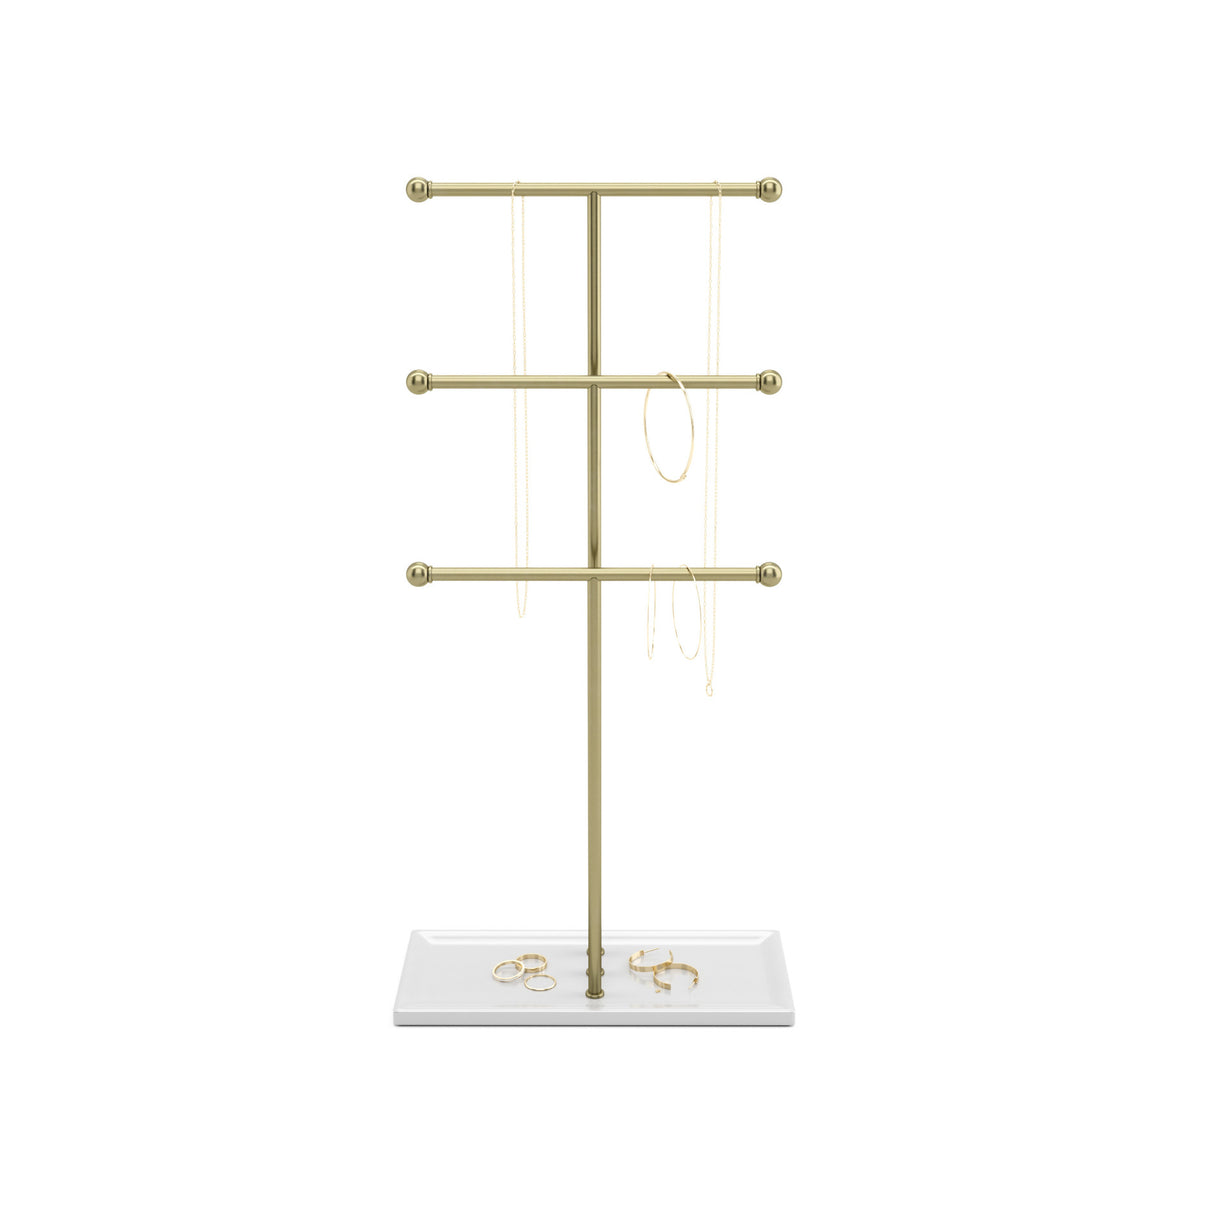 Teamkio Jewelry Stand Tree with Large White Storage Box Tabletop Jewelry Organizer Display Tree for Necklace Rings Bracelets Watches